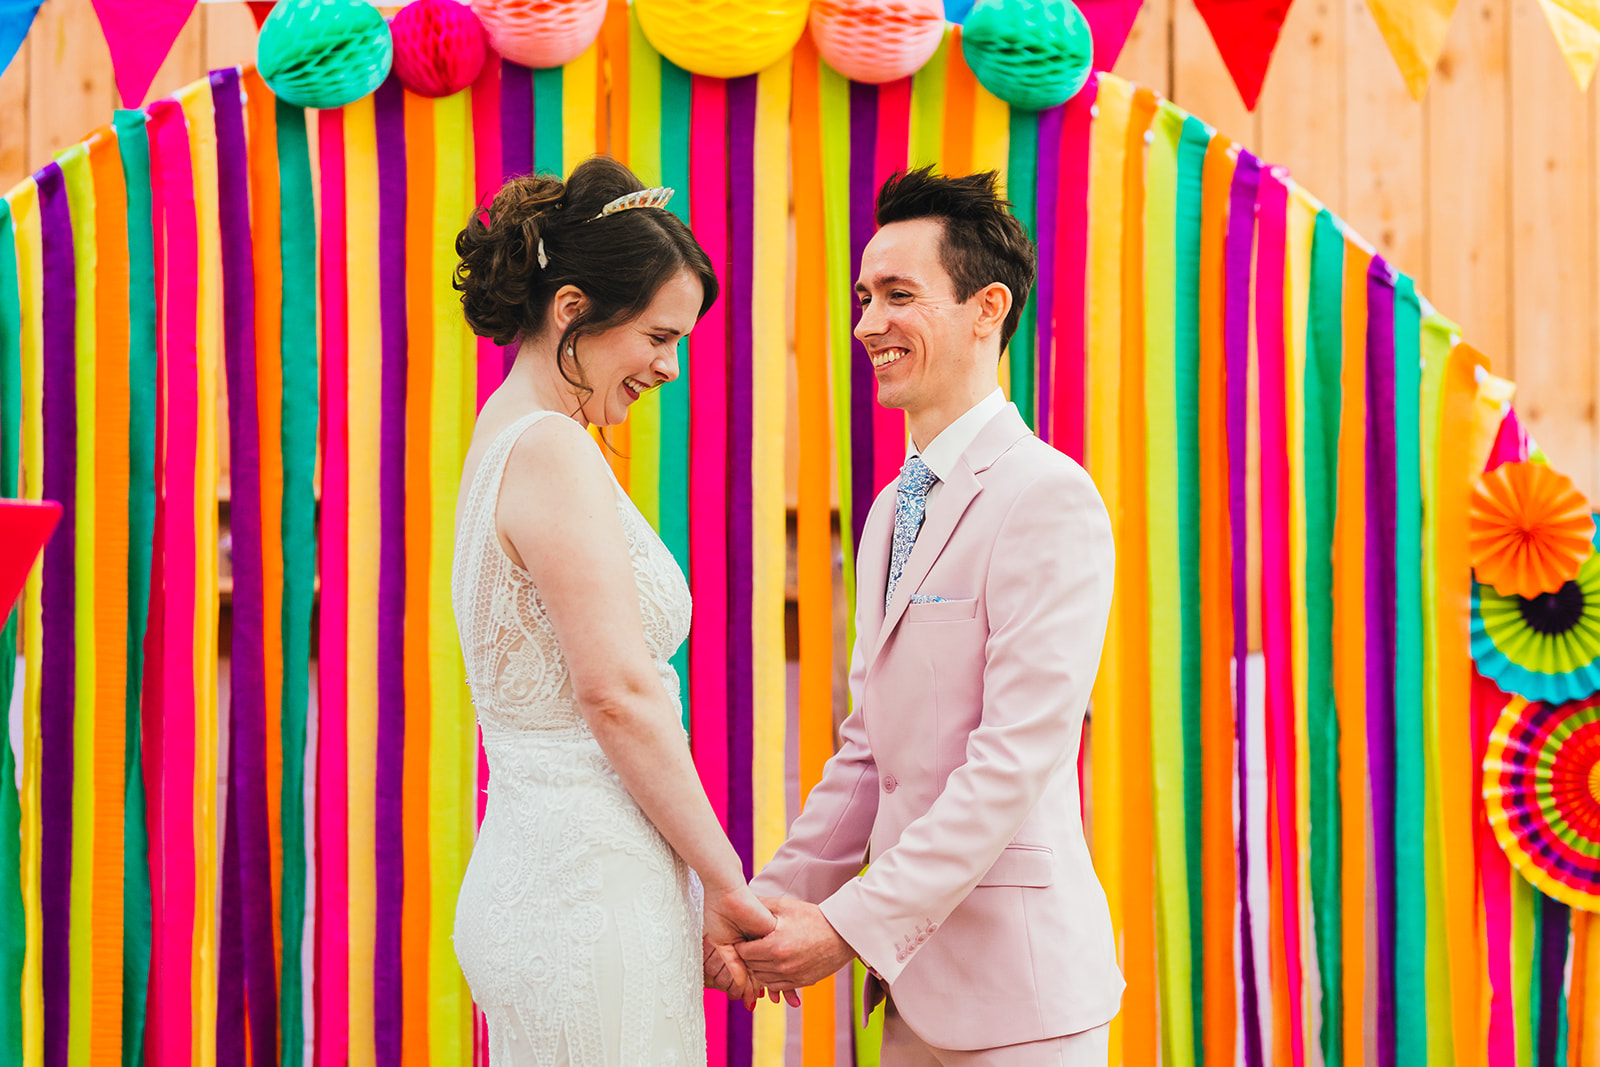 rainbow wedding backdrop made from ribbons and paper lanterns - unique wedding backdrop